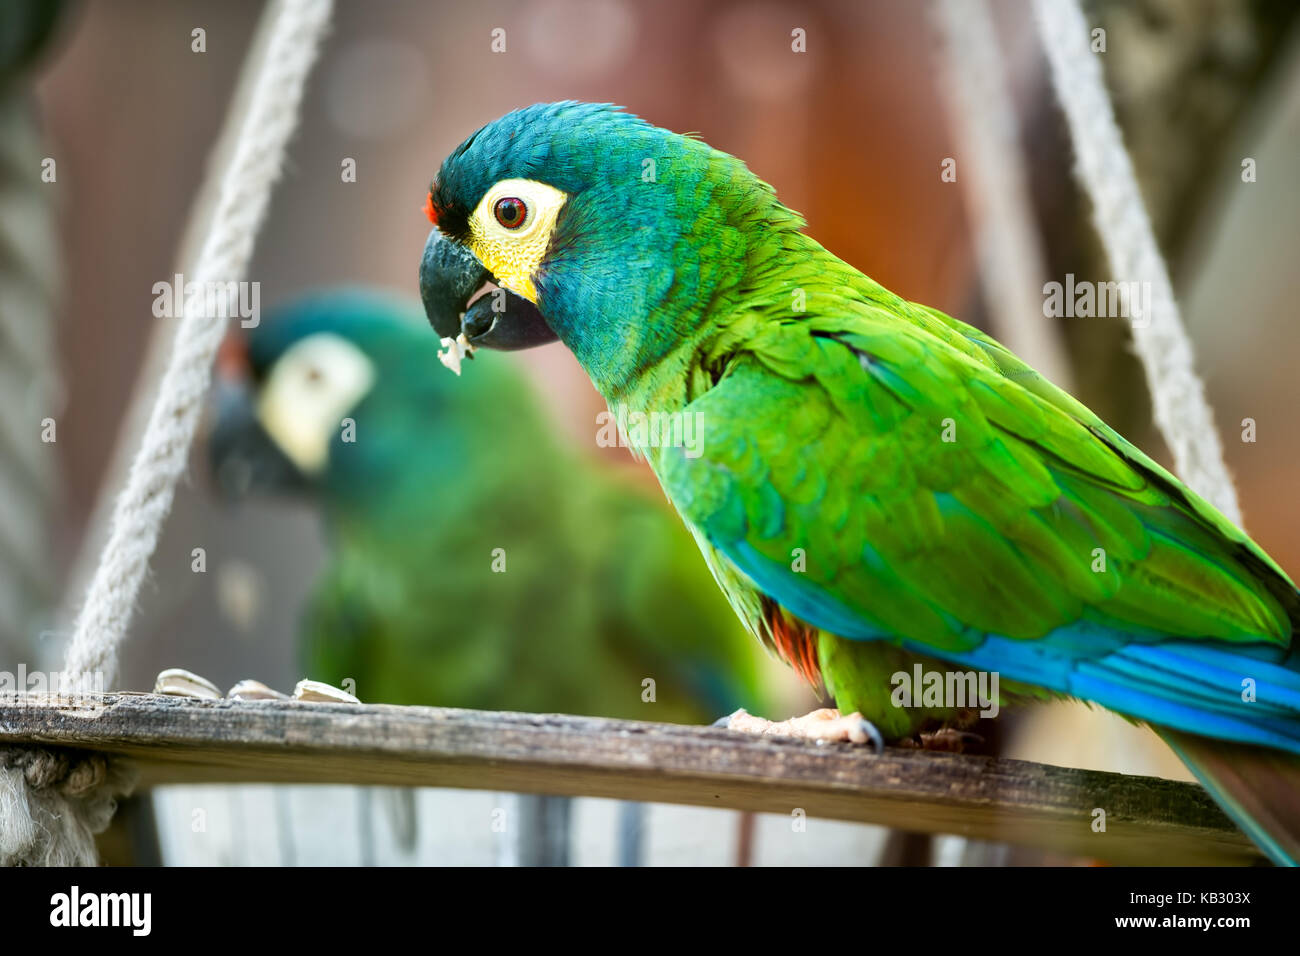 beautiful green parrot front of mirror Stock Photo